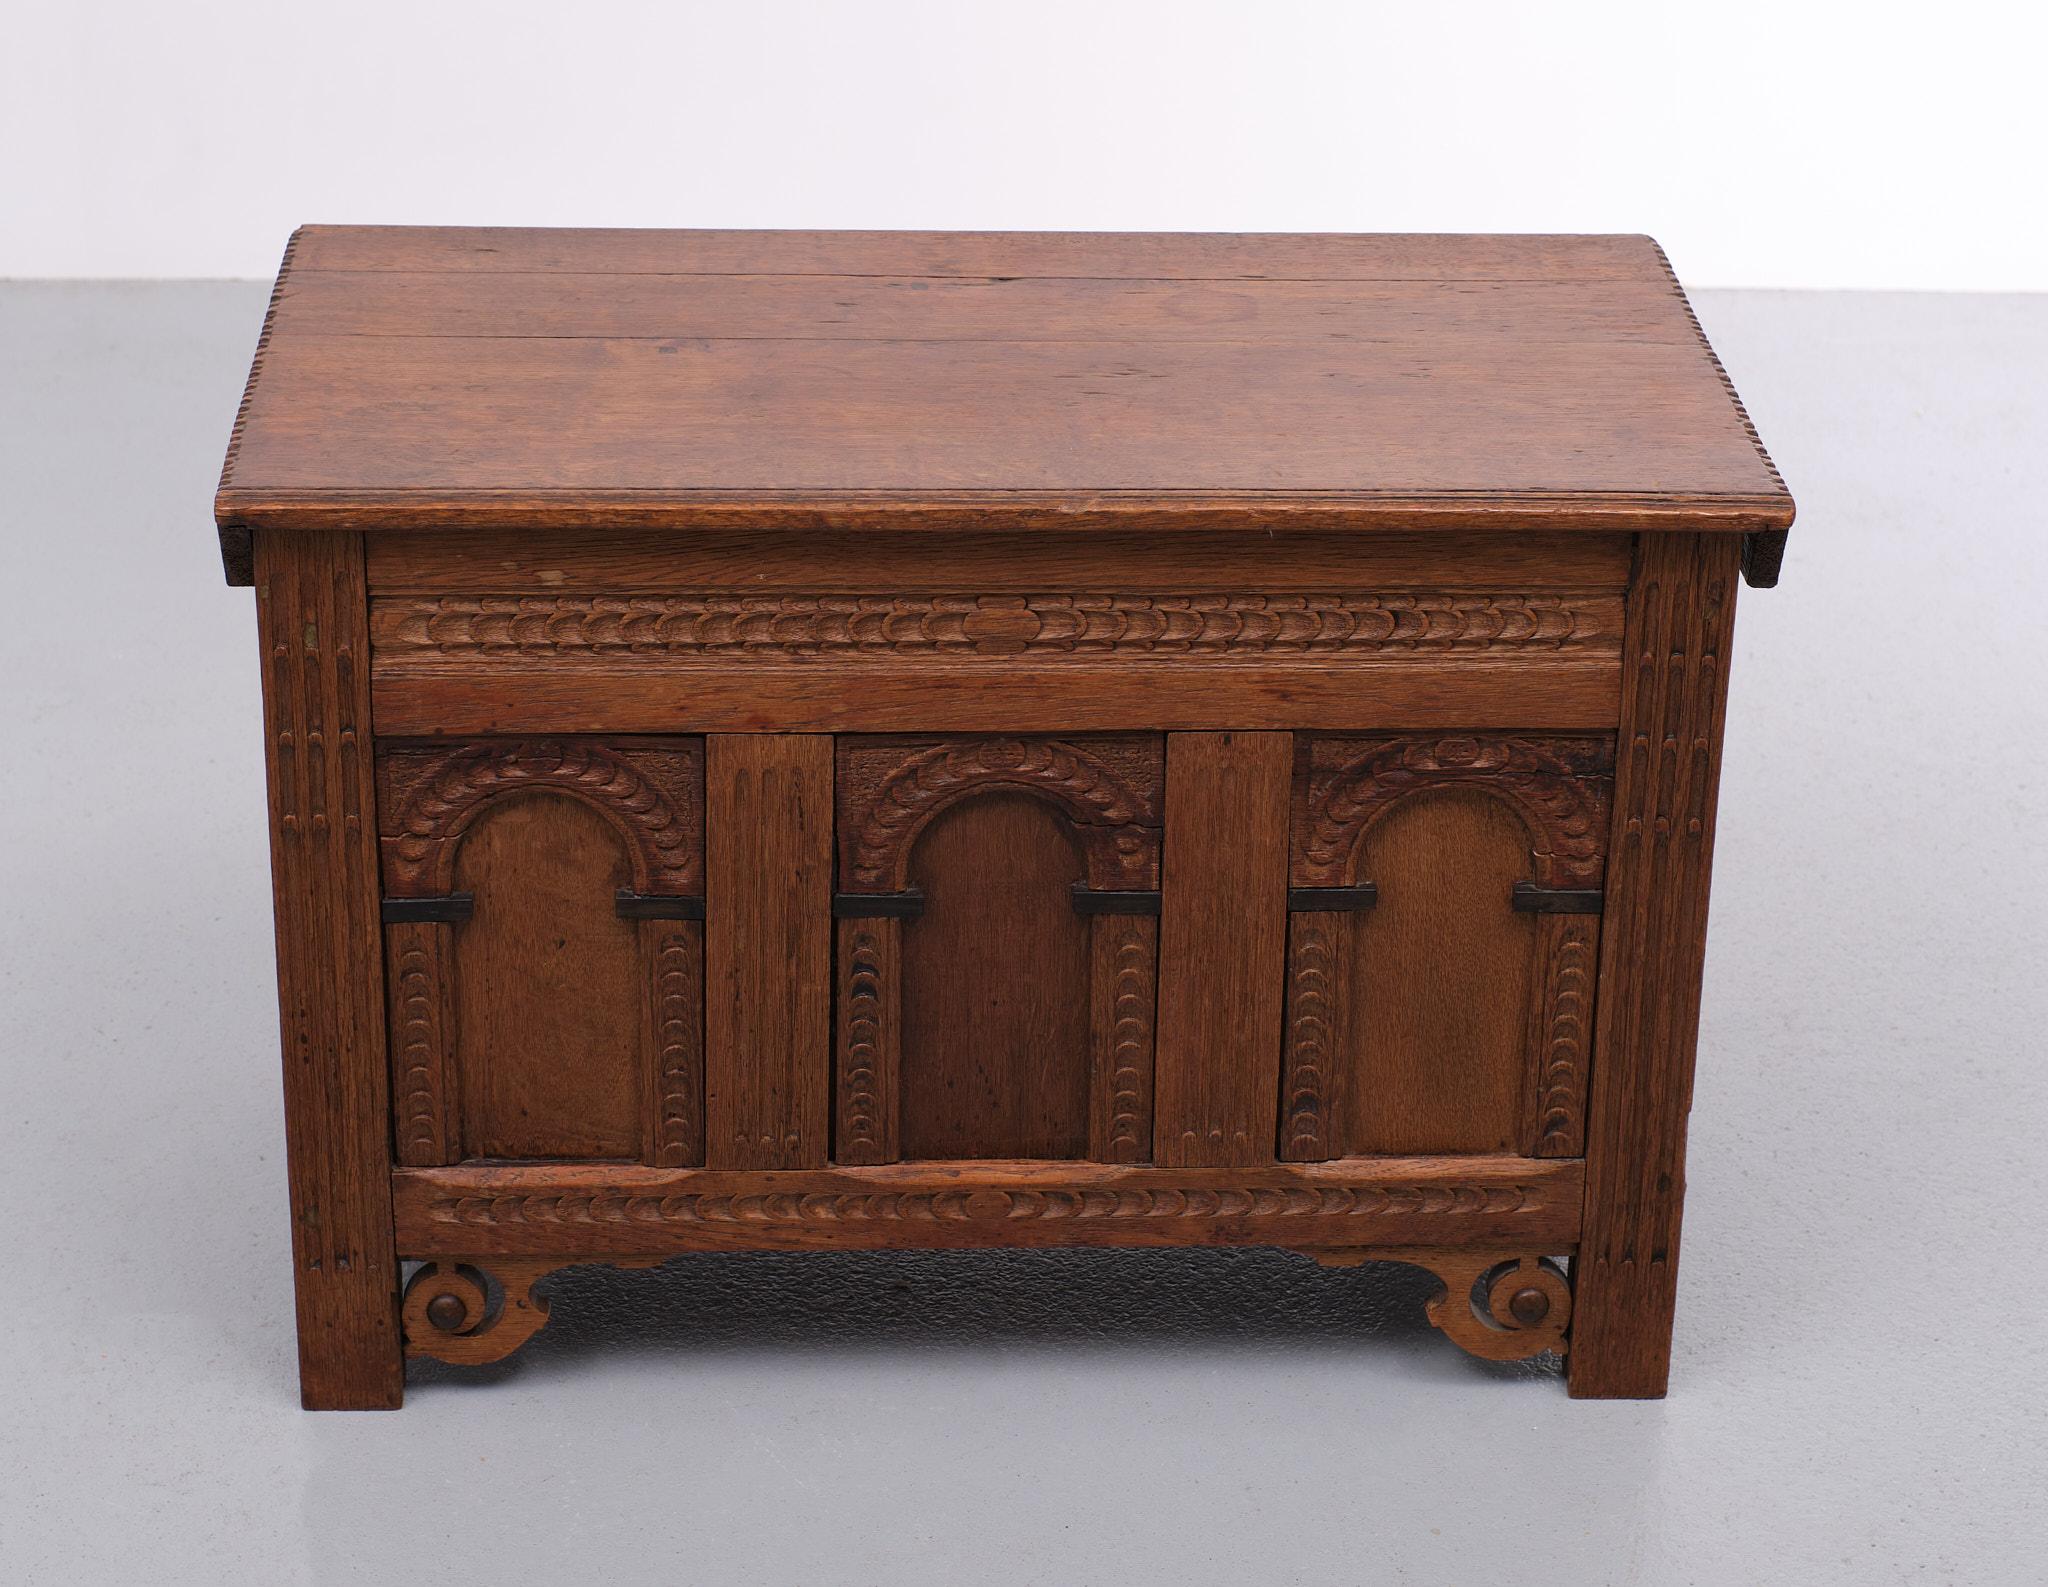 For sale this beautiful miniature blanket chest. Solid oak with Ebony details. 
 early 19th century three panels on the front. Very nice patine on the oak wood.
Hand carved. Still very useful. The hinges are replaced. 
P S its not my real face.